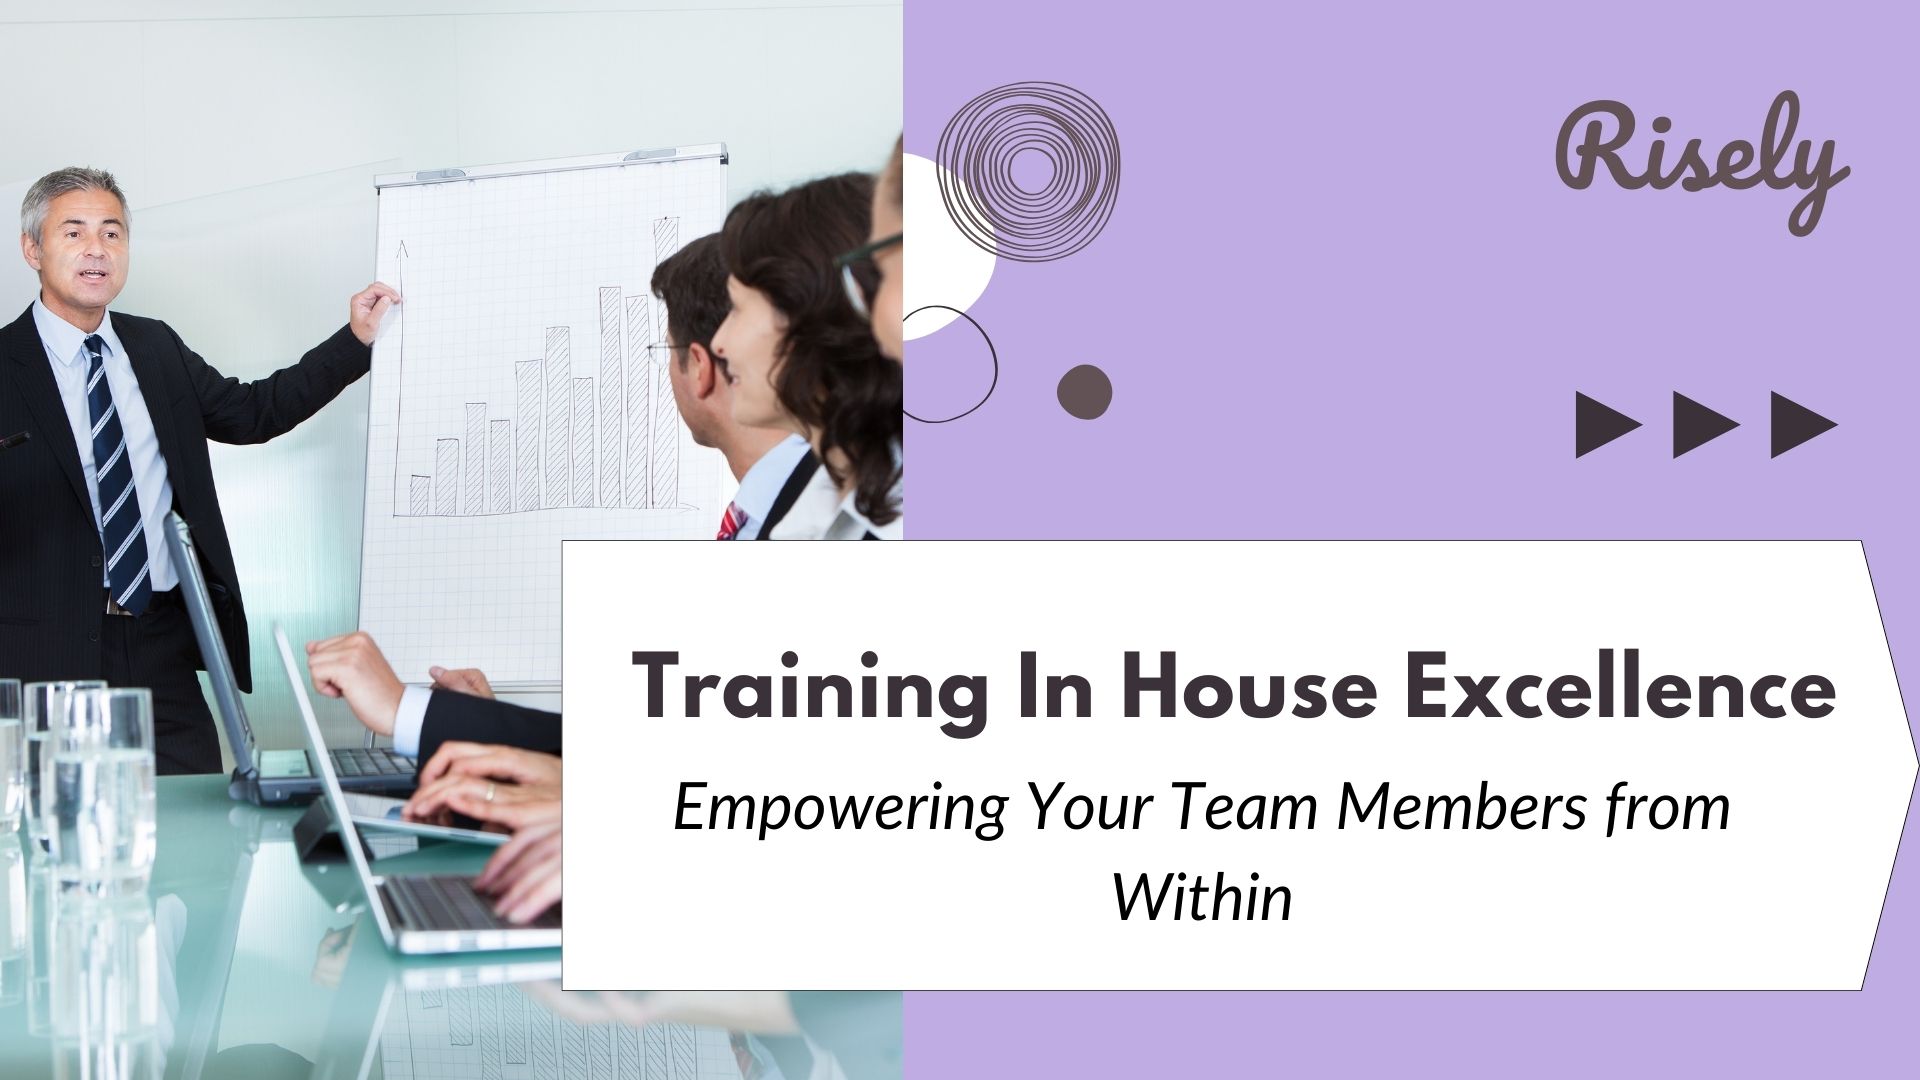 Training In House Excellence: Empowering Your Team Members from Within